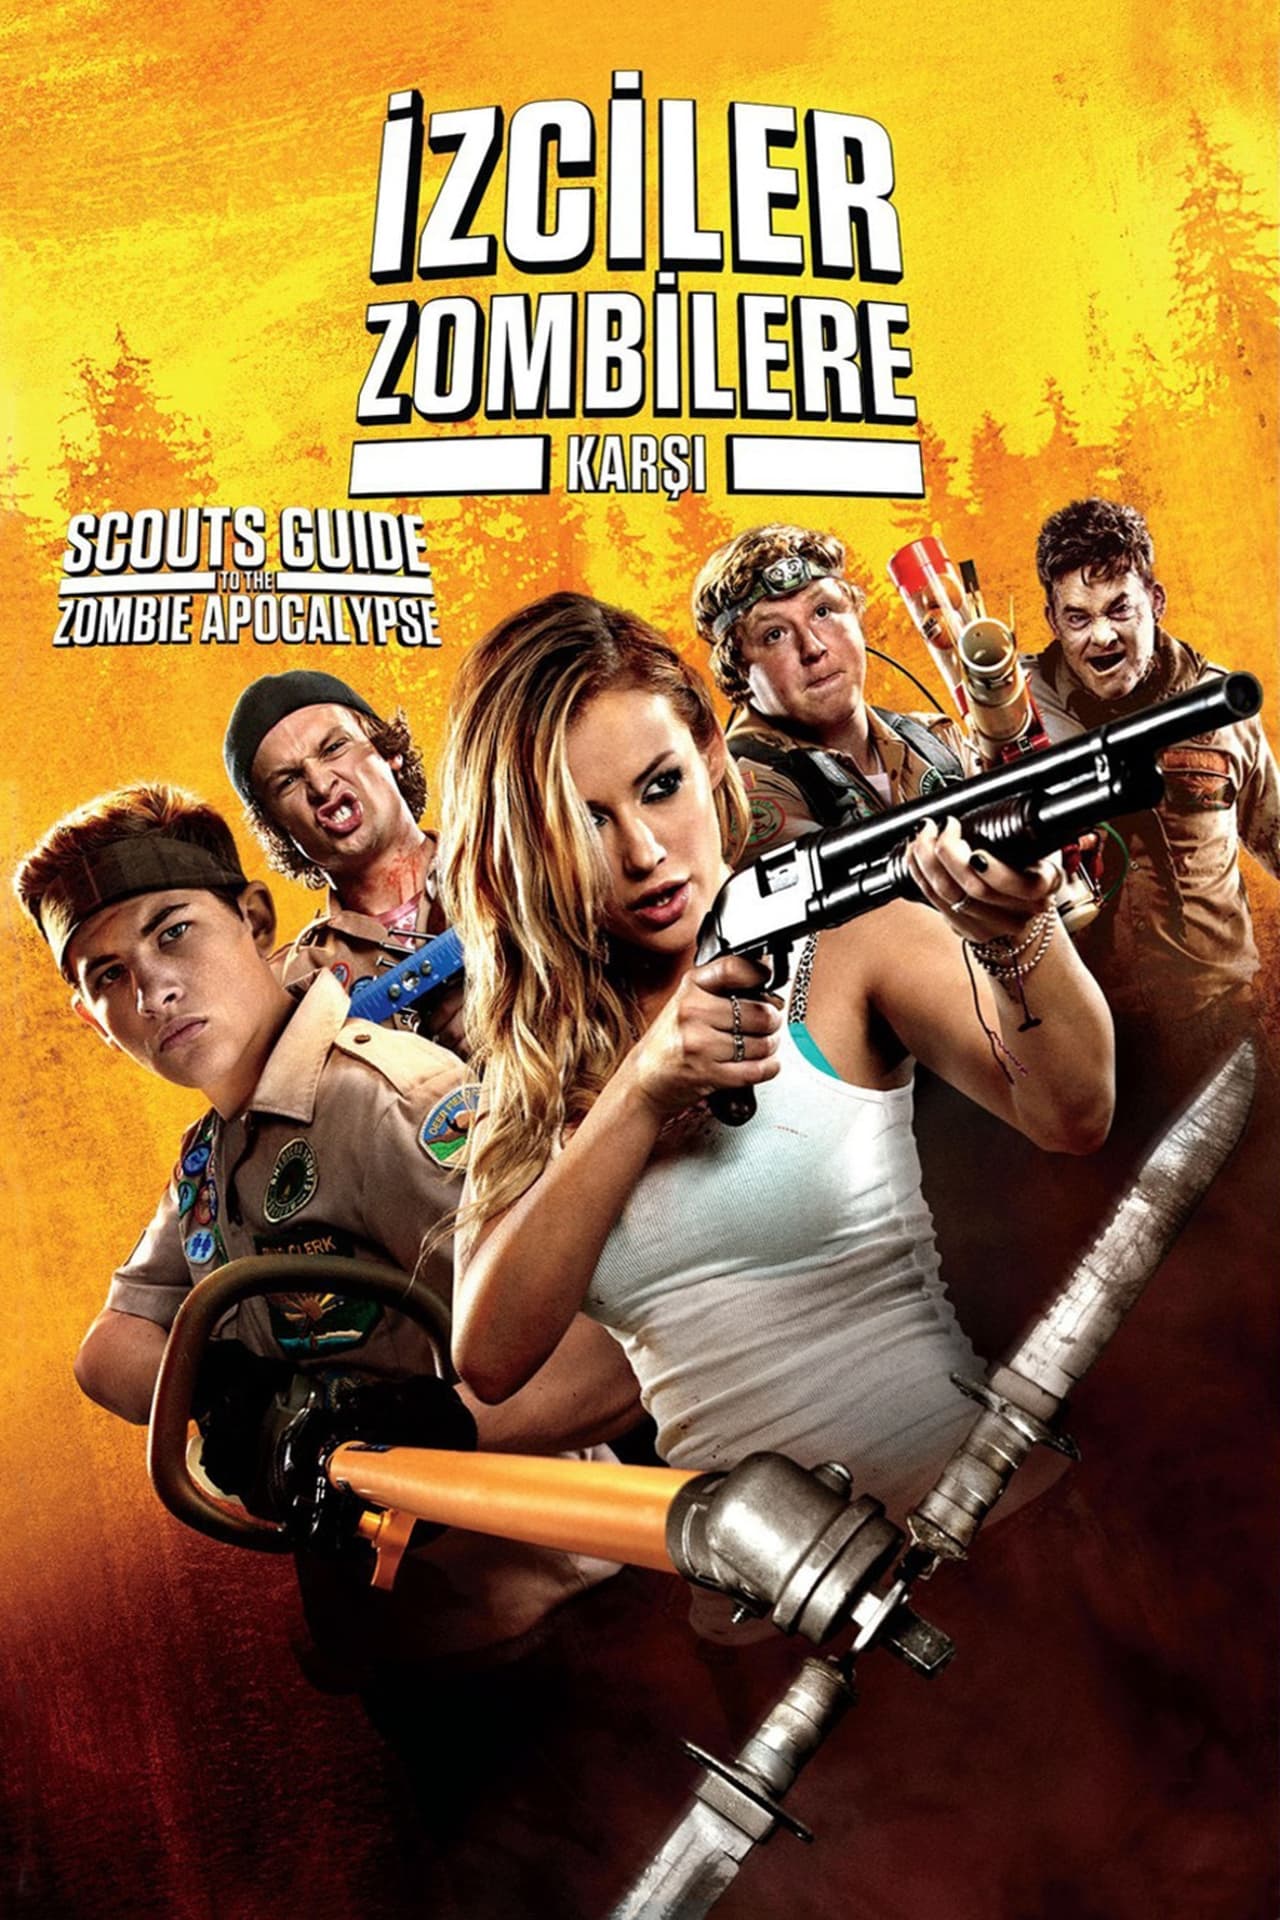 Scouts Guide to the Zombie Apocalypse (2015) 192Kbps 23.976Fps 48Khz 2.0Ch DigitalTV Turkish Audio TAC